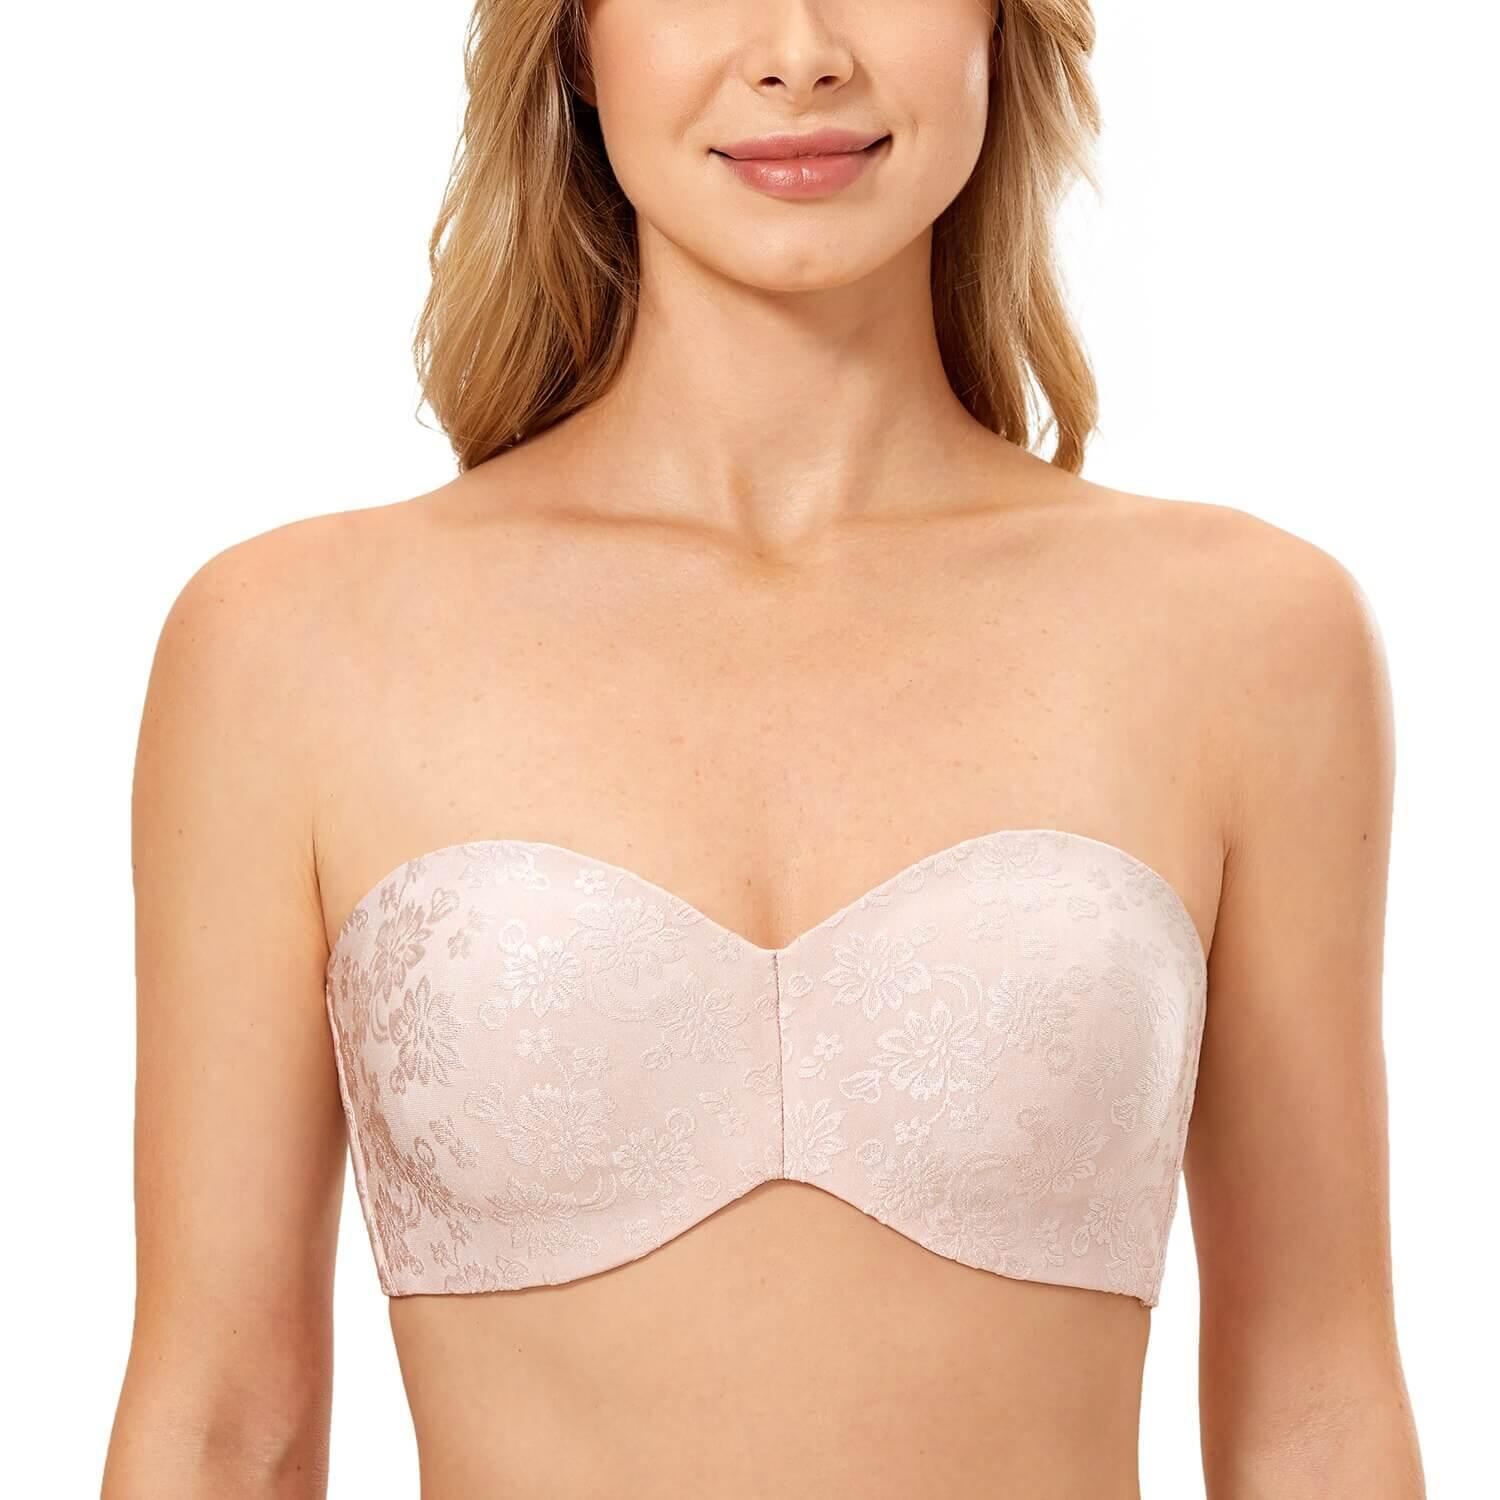 Women's Strapless Bra For Large Bust Minimizer Unlined Bandeau